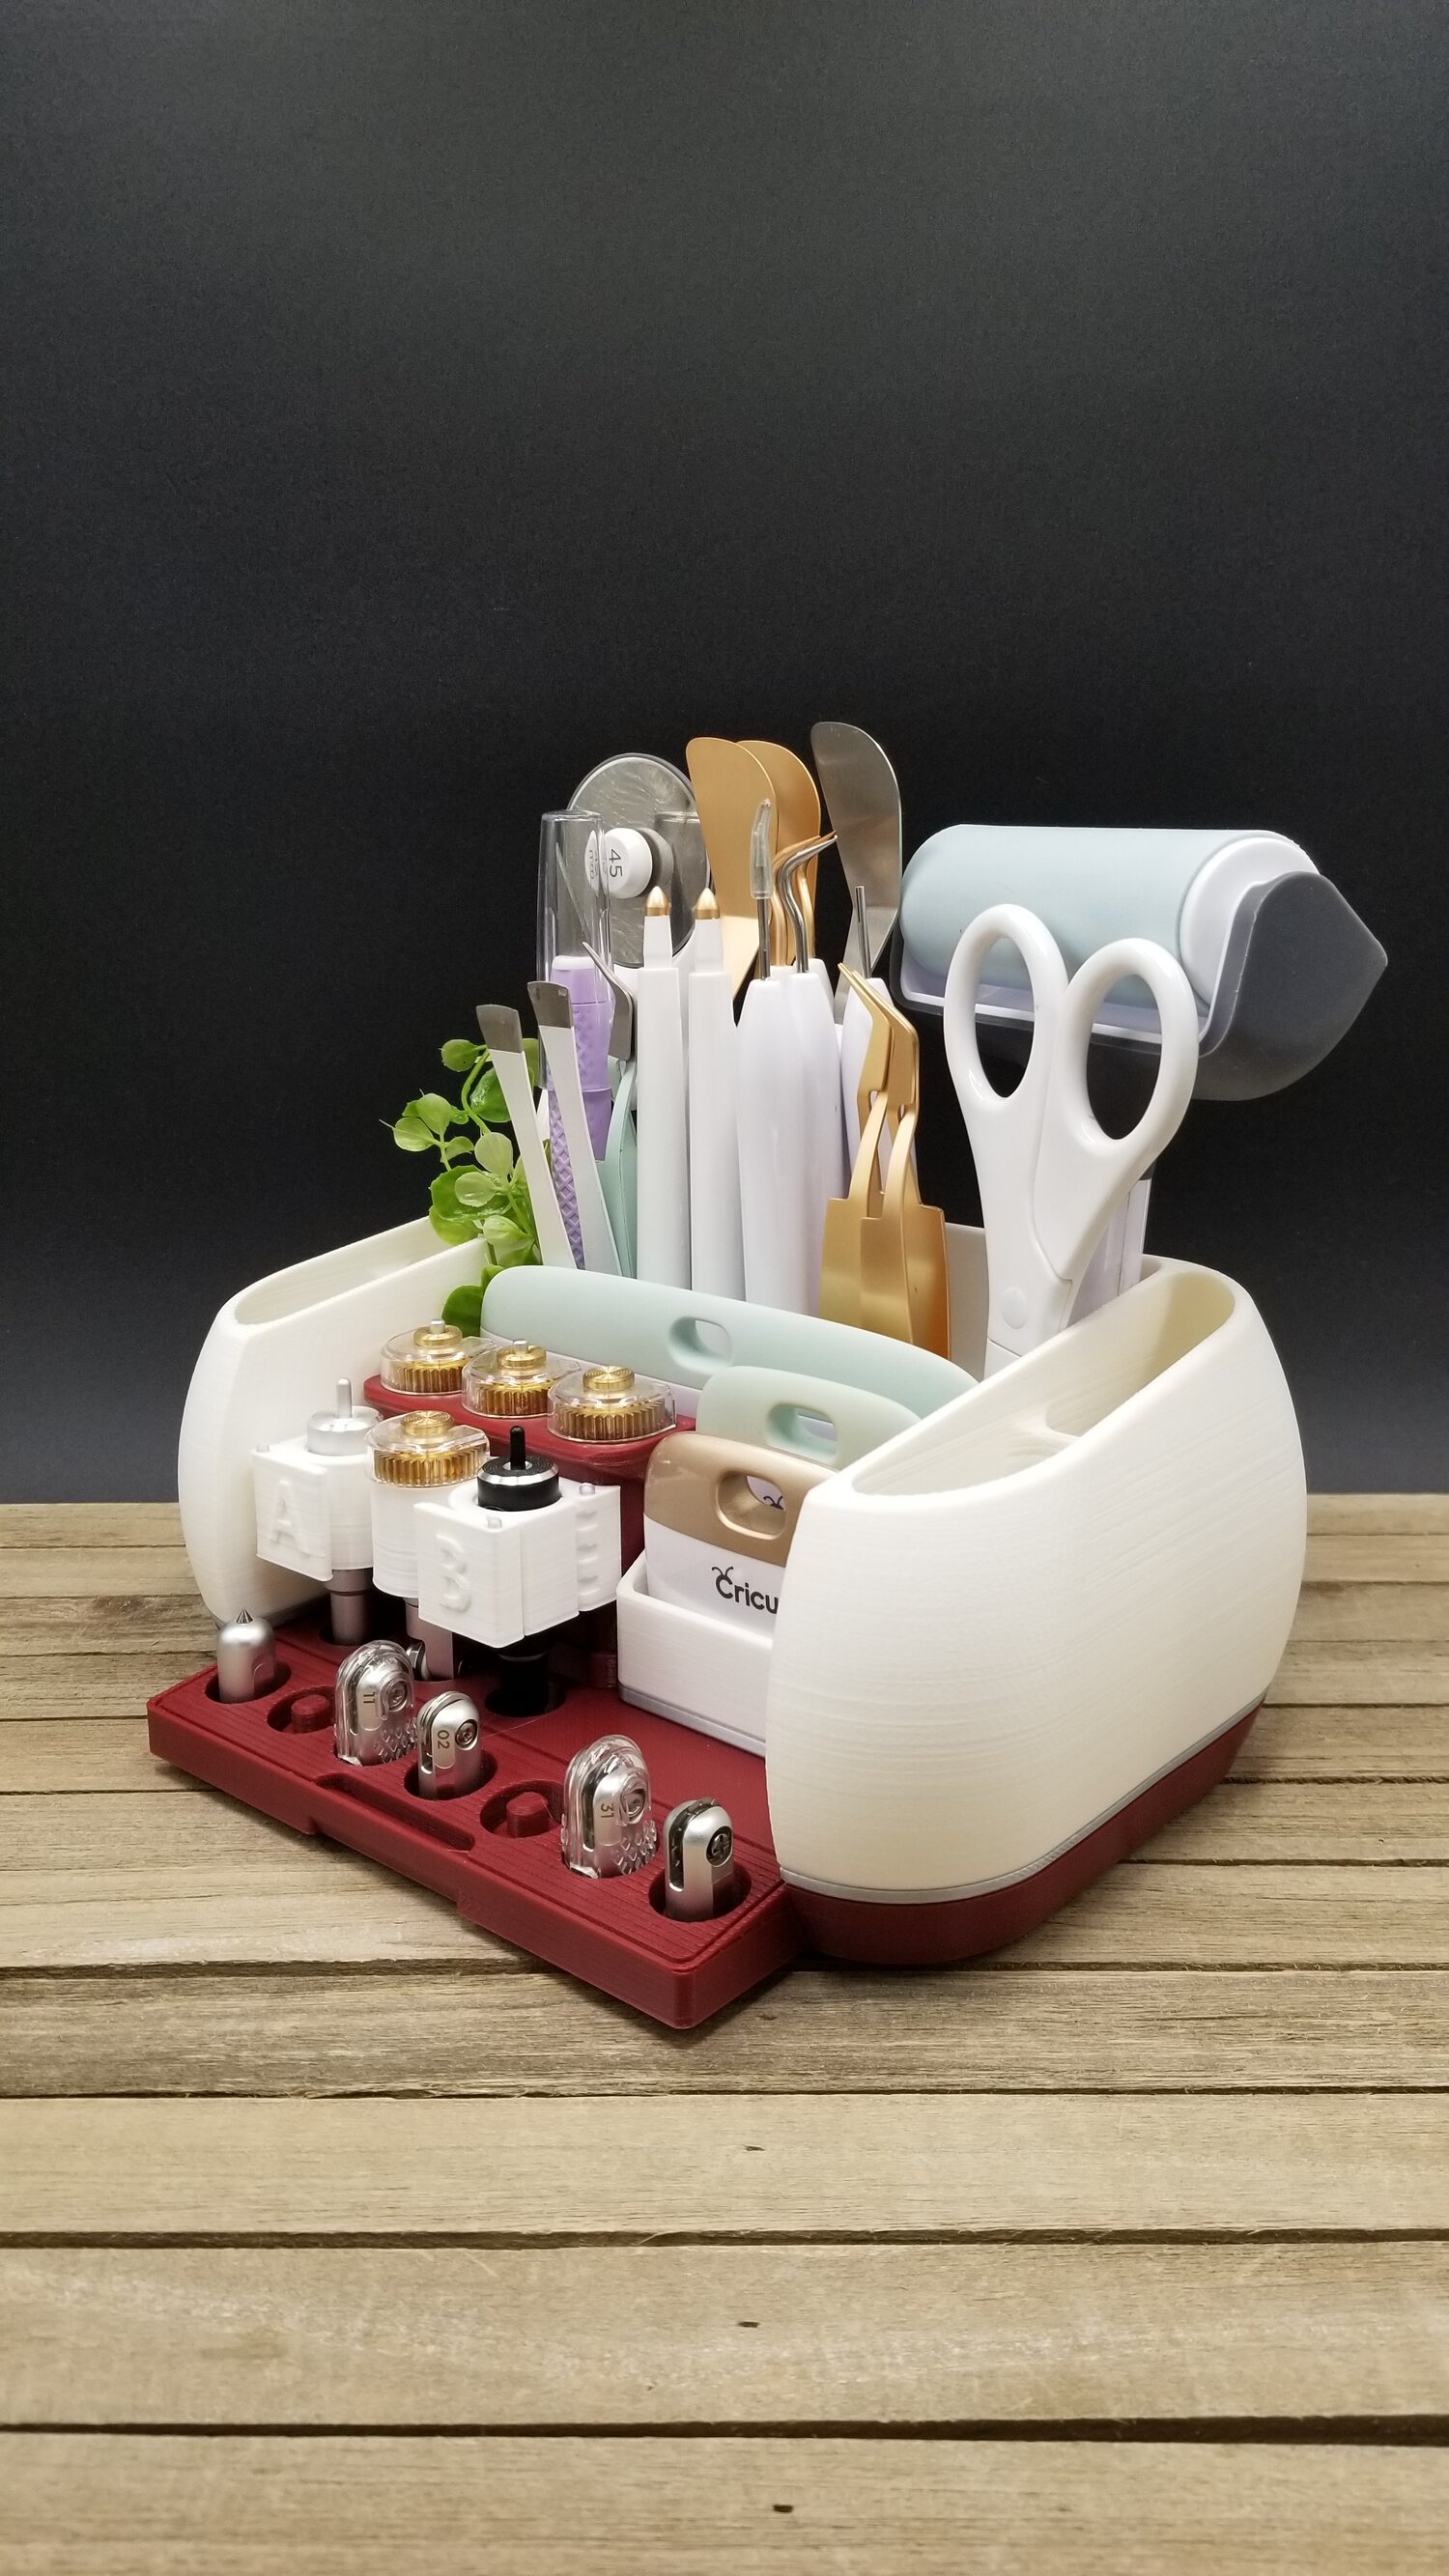 Tool Holder for Cricut Tool and Blades Designed by Jennifer Maker 3D  Printed Cutting Machine Tool Holder 